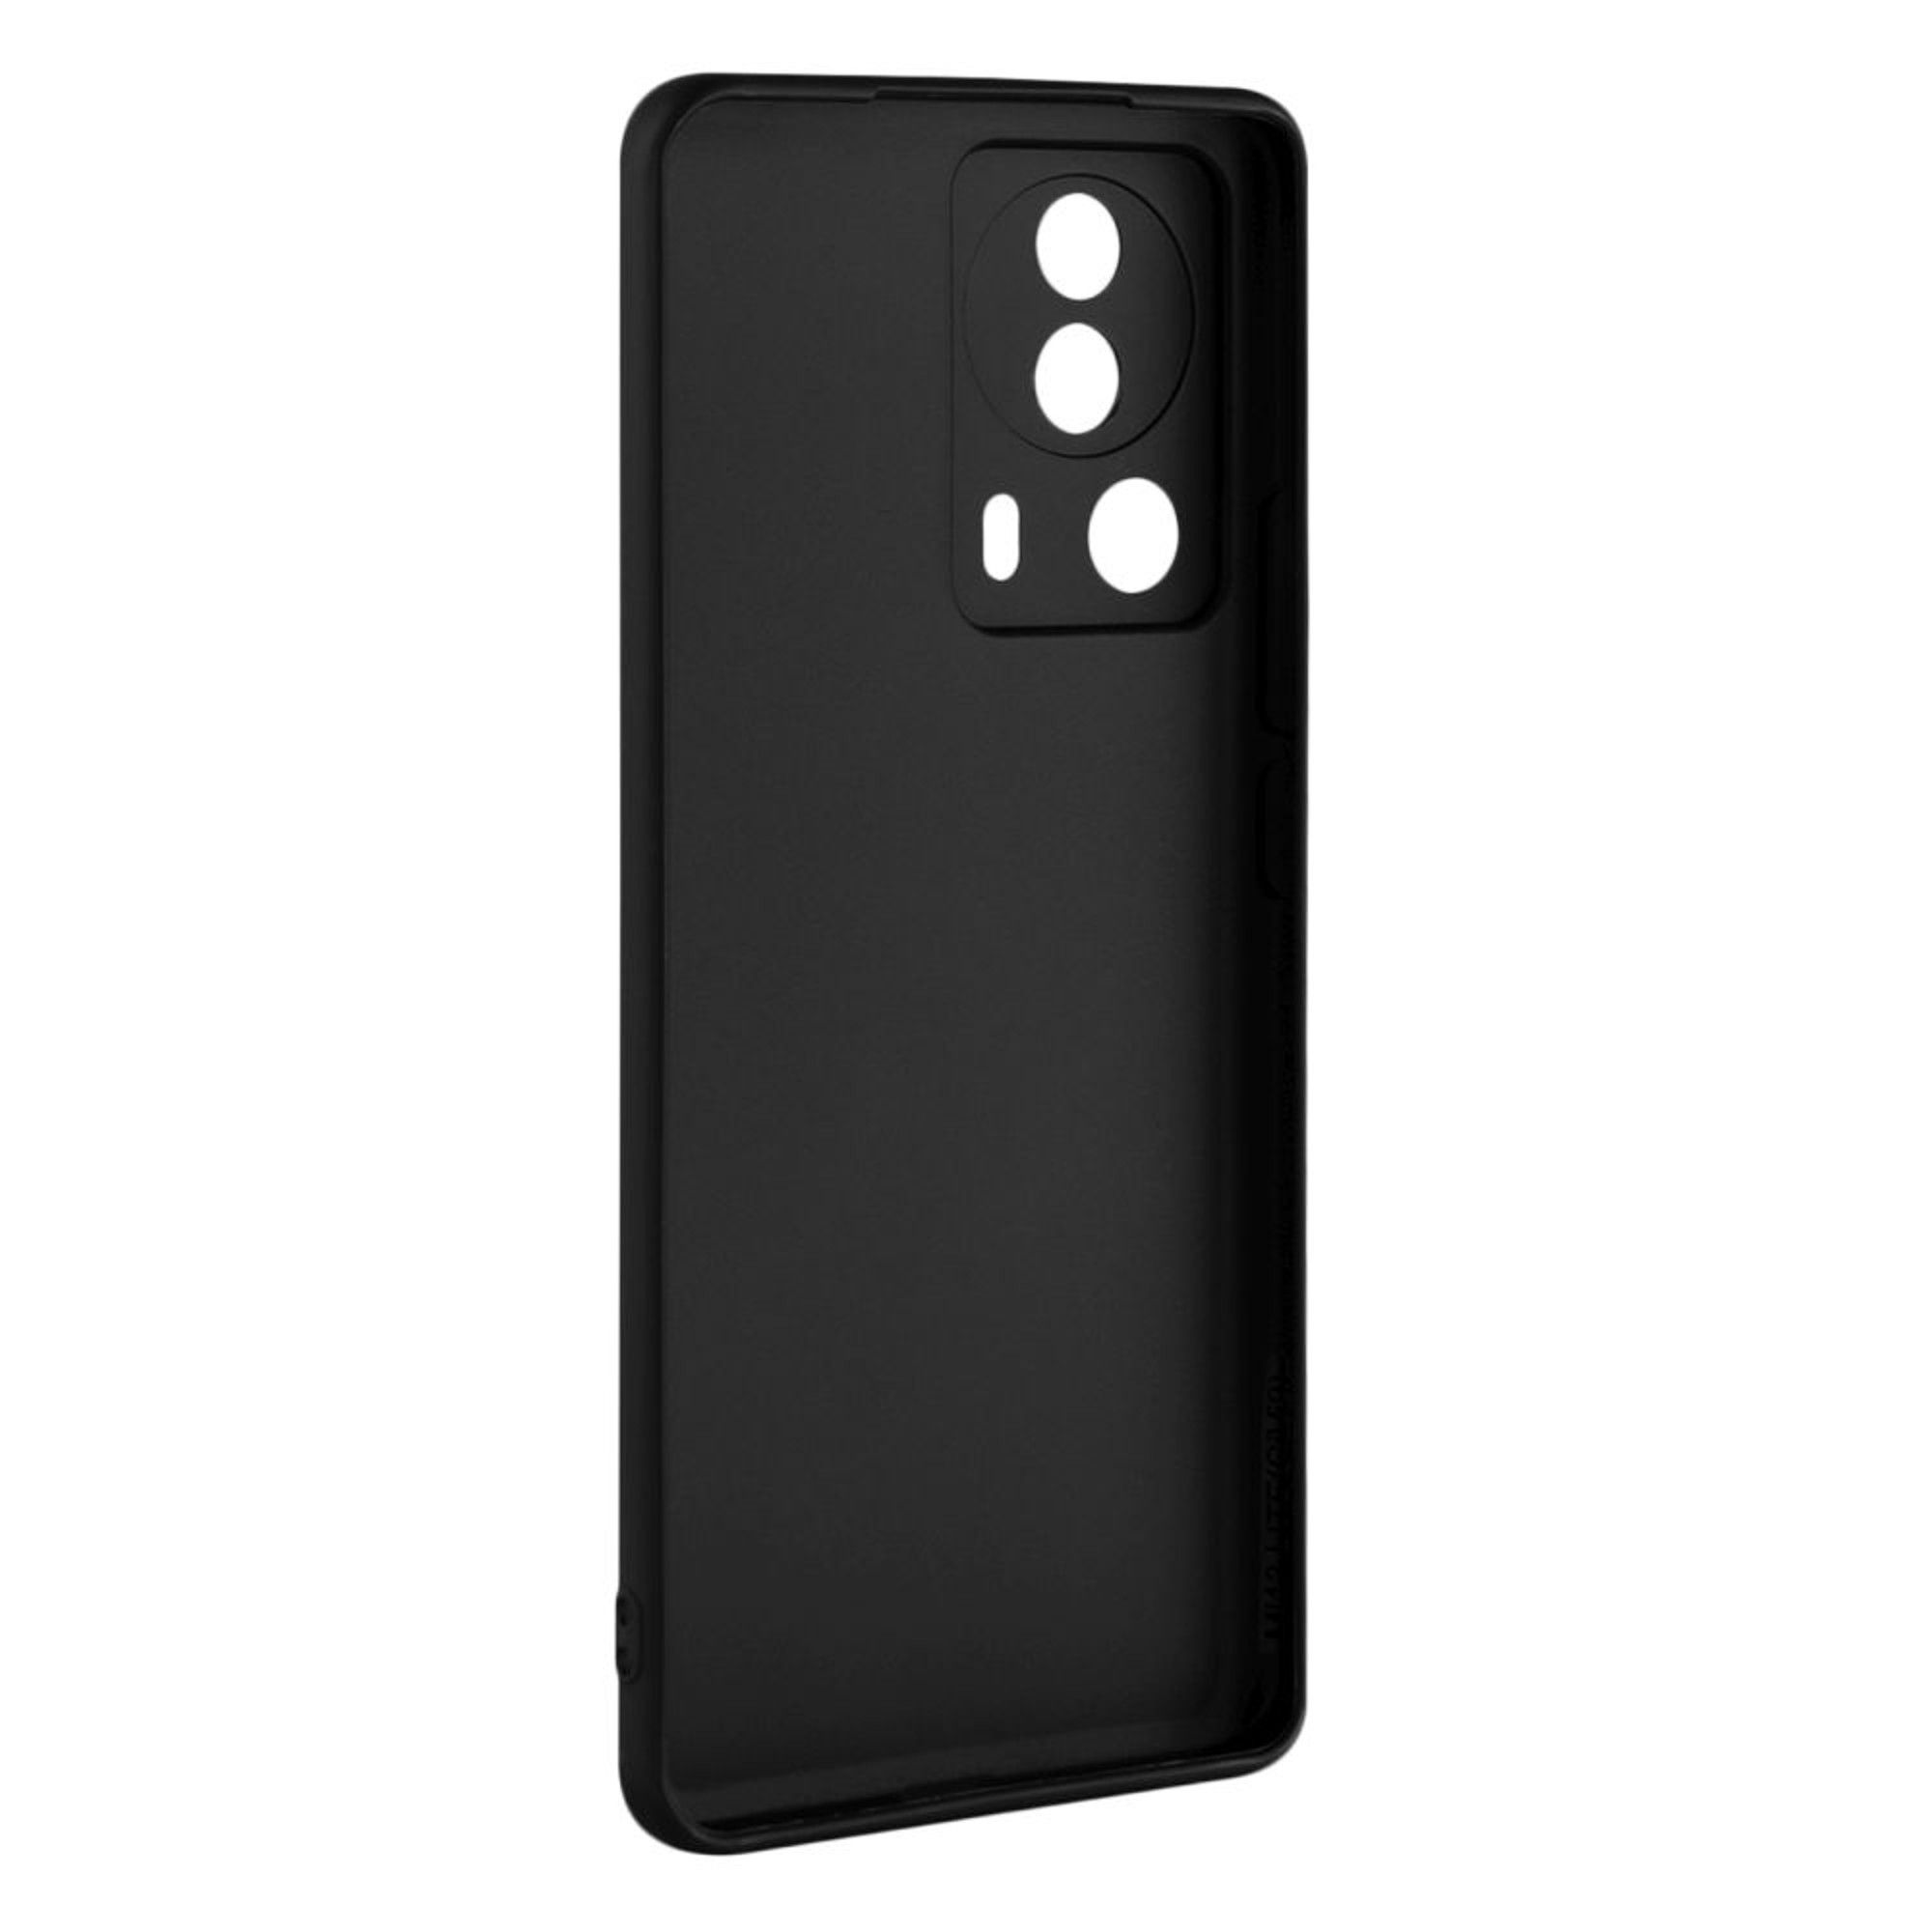 13 Story Schwarz FIXST-1097-BK, Lite, Soft-Touch Xiaomi, Backcover, FIXED